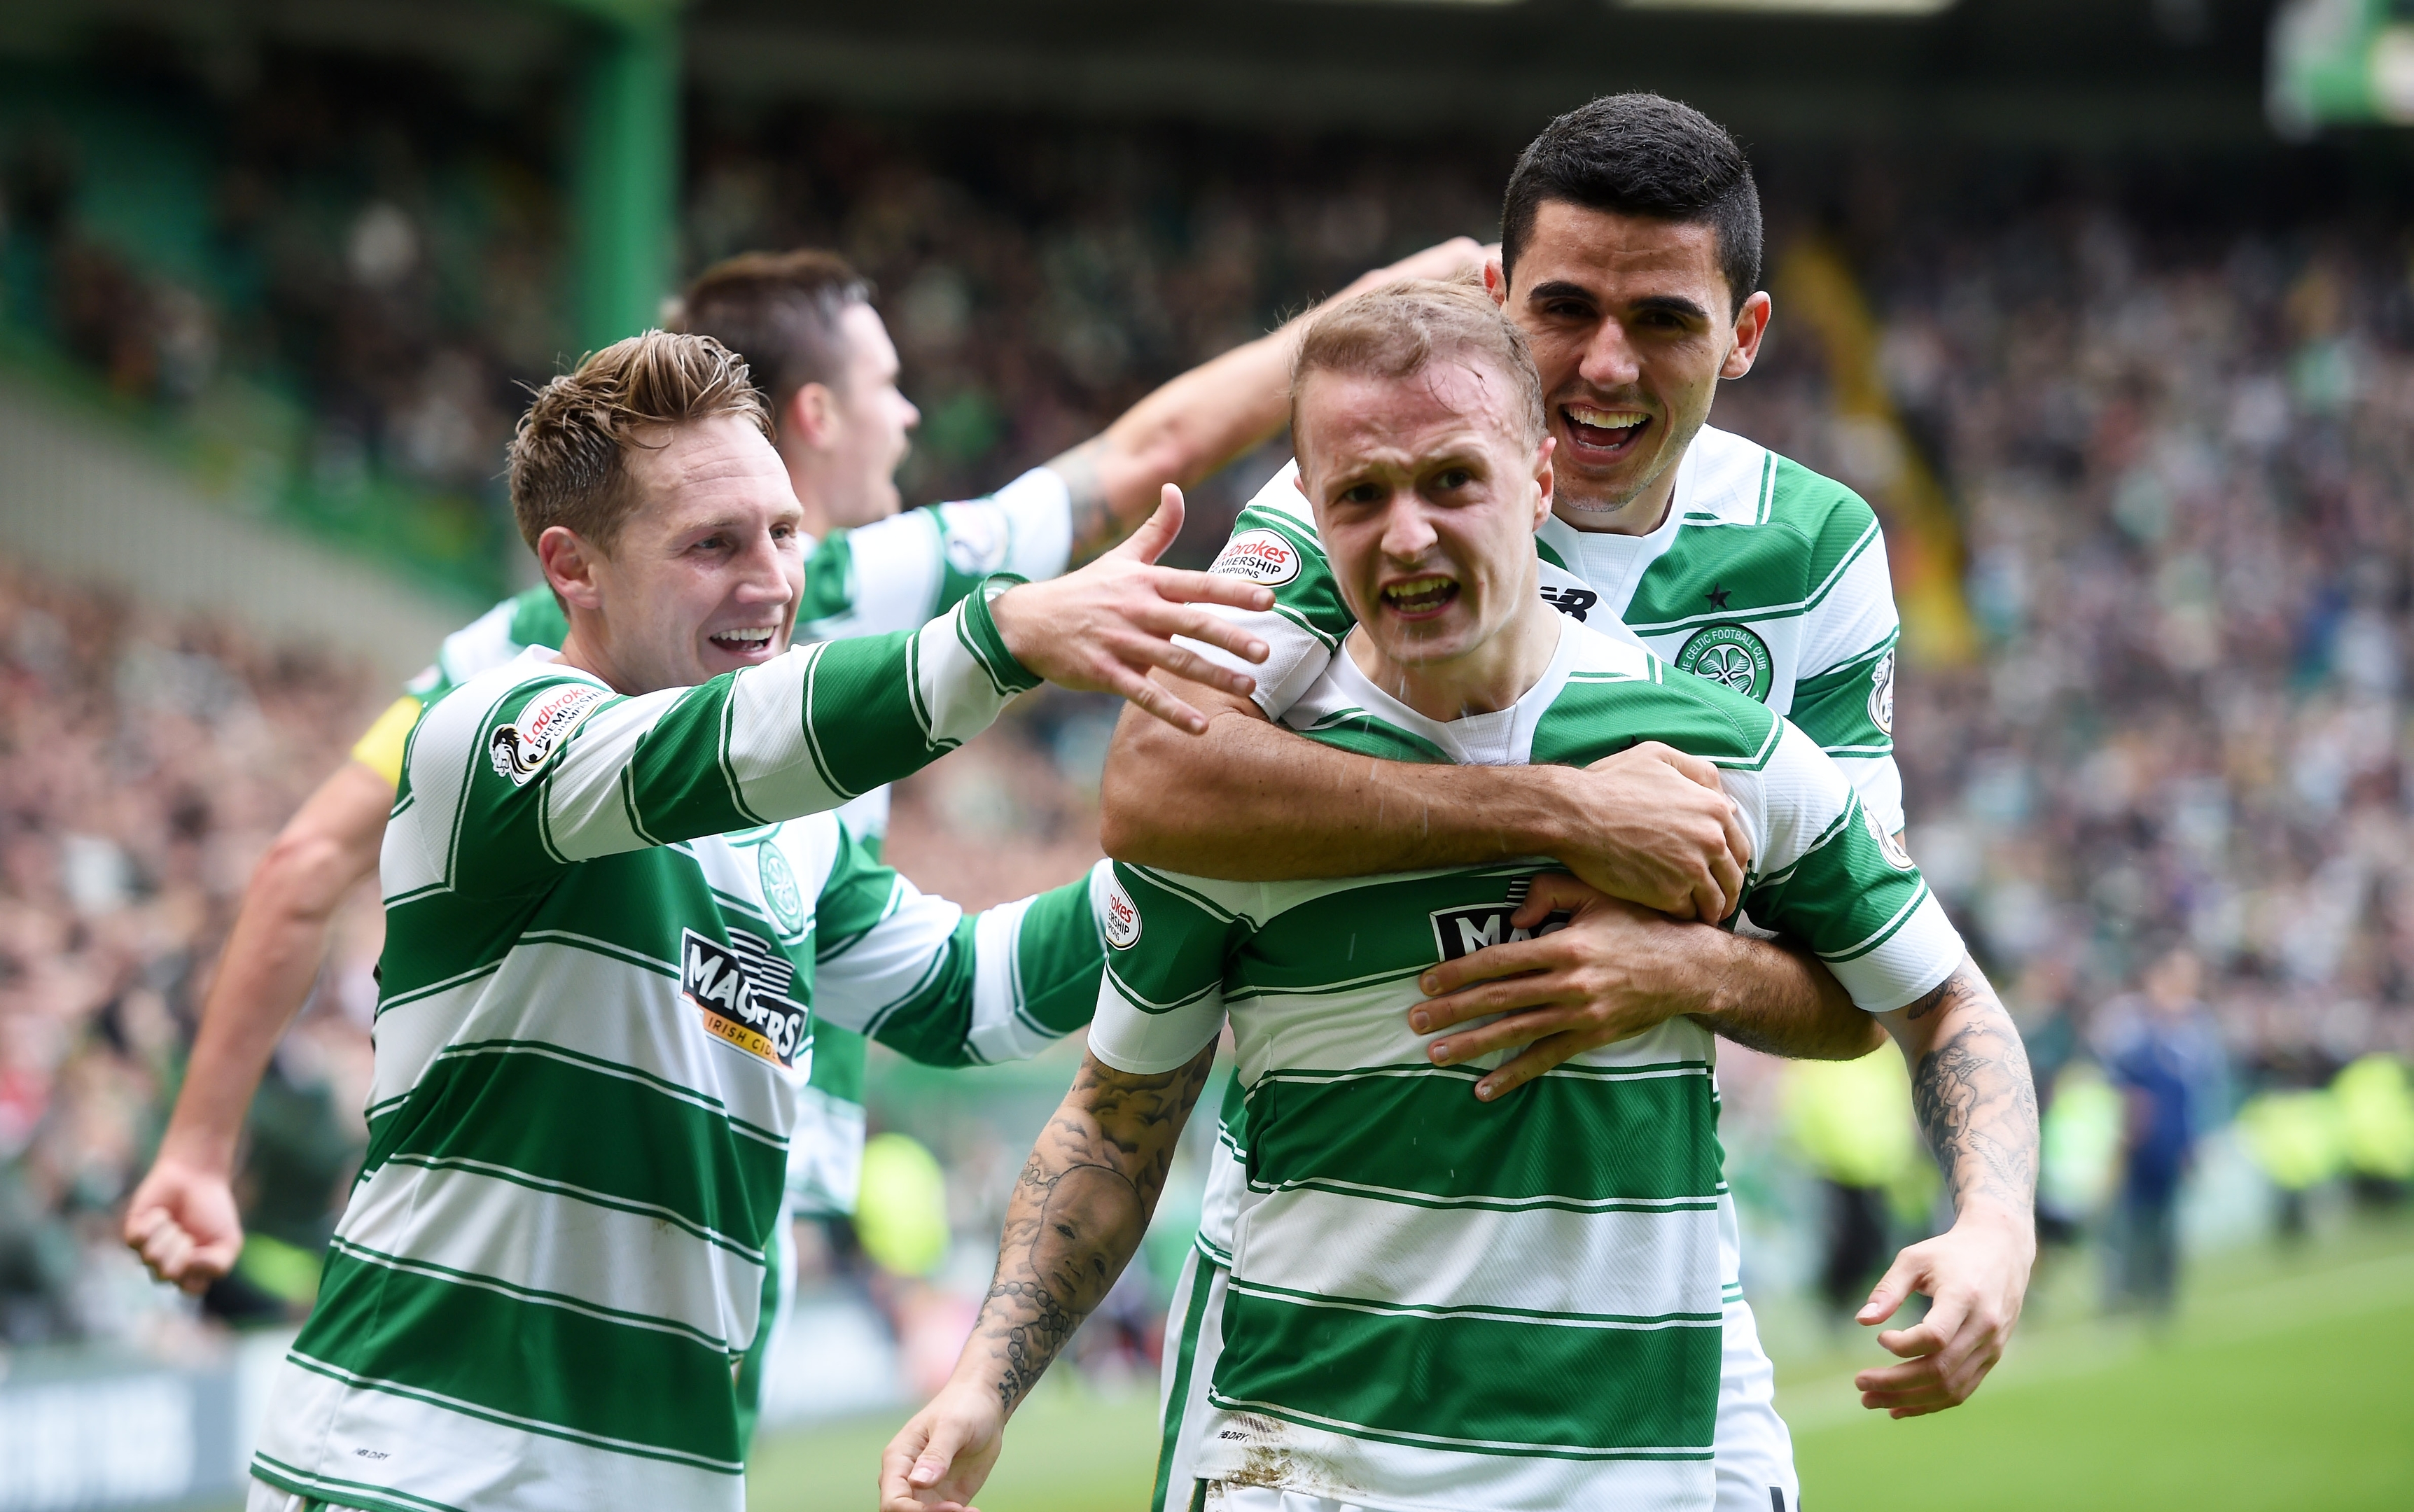 Celtic's Leigh Griffiths celebrates scoring from the spot with team-mates Tom Rogic (right) and Kris Commons